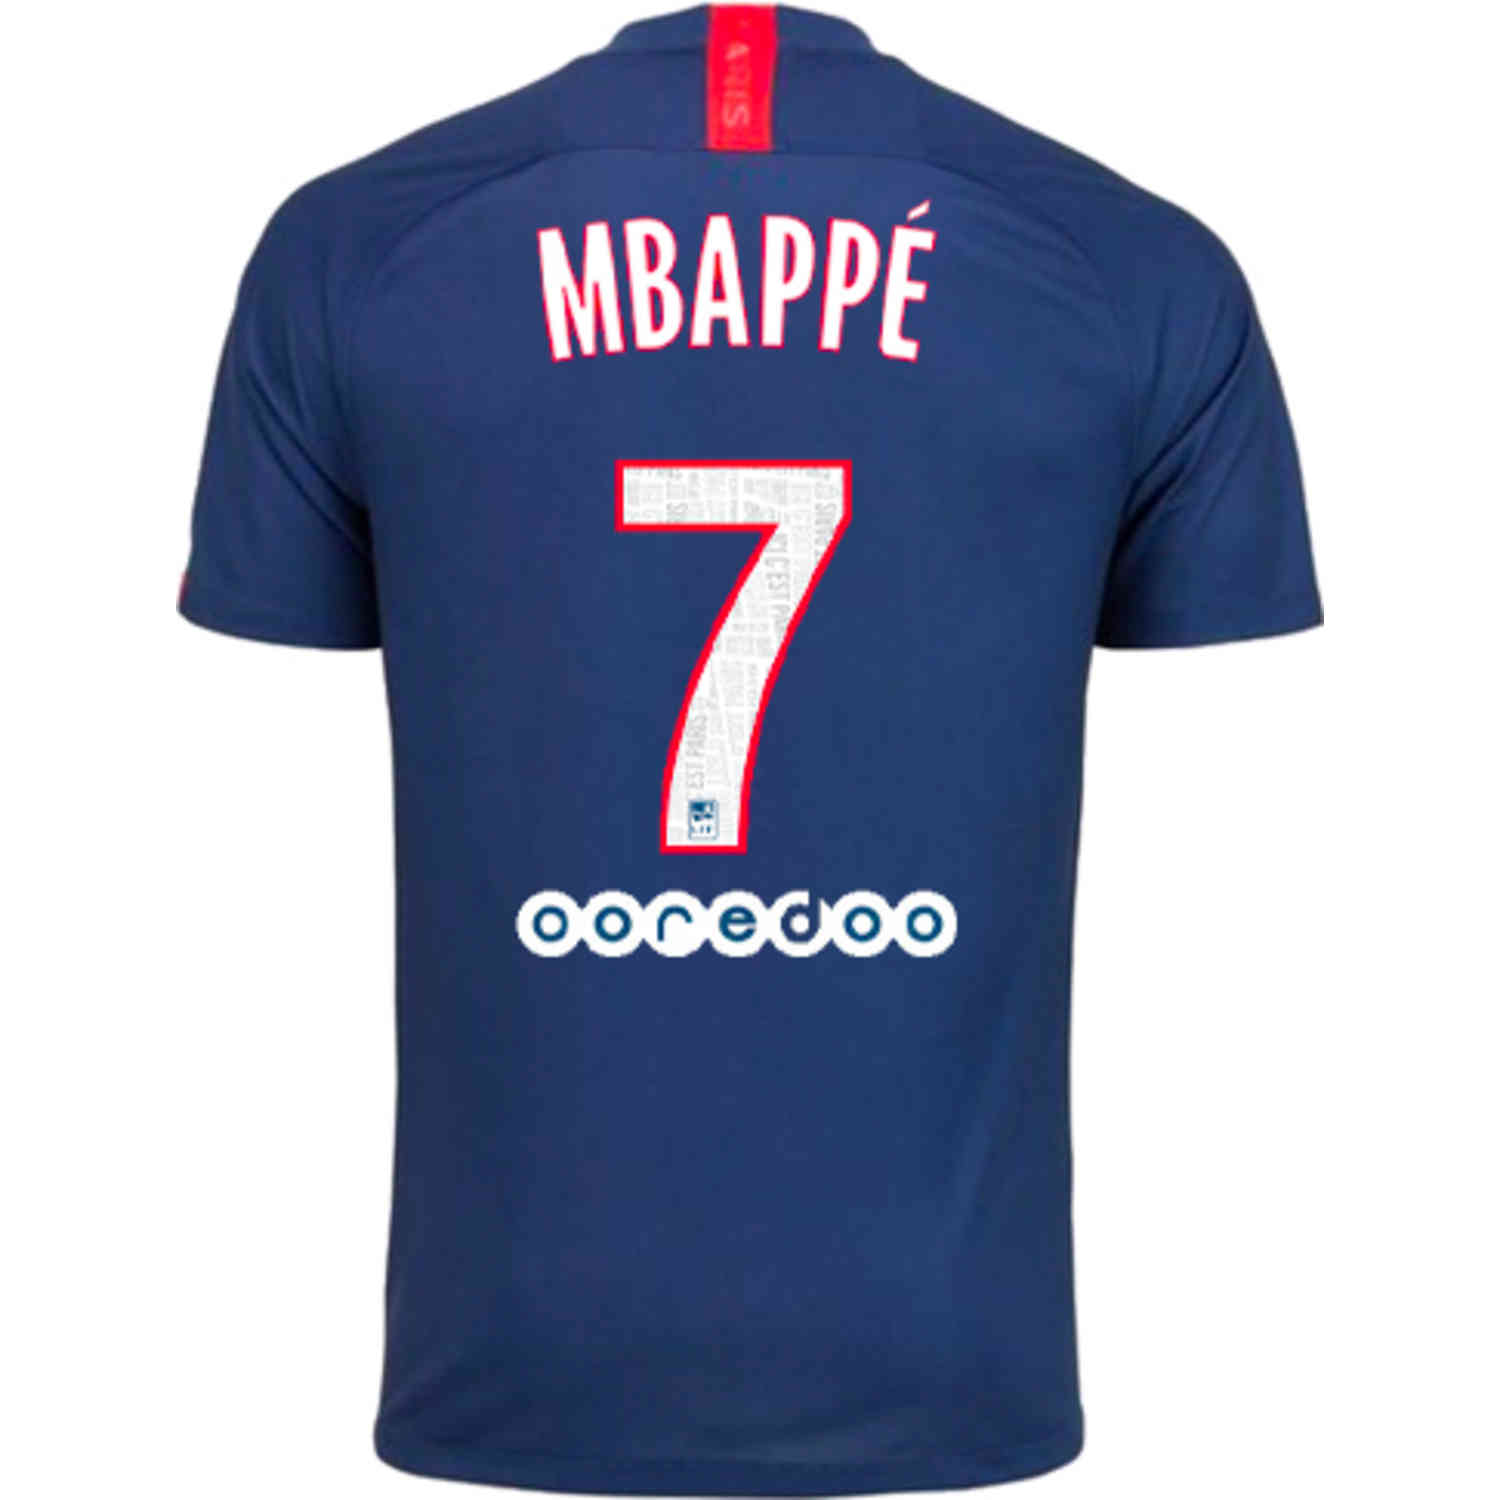 youth mbappe jersey